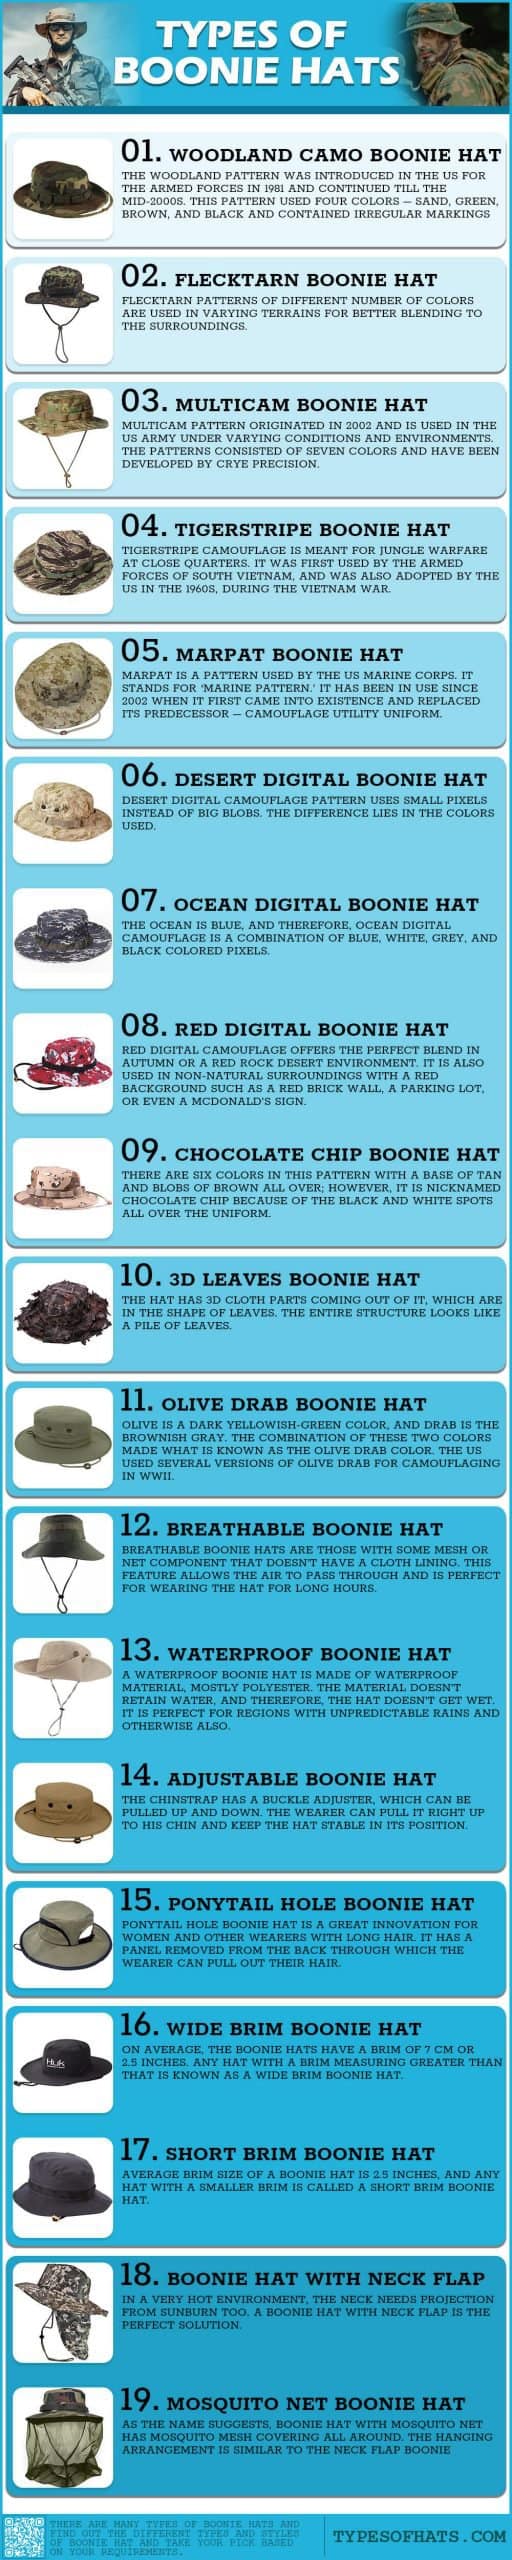 Types of Boonie Hats